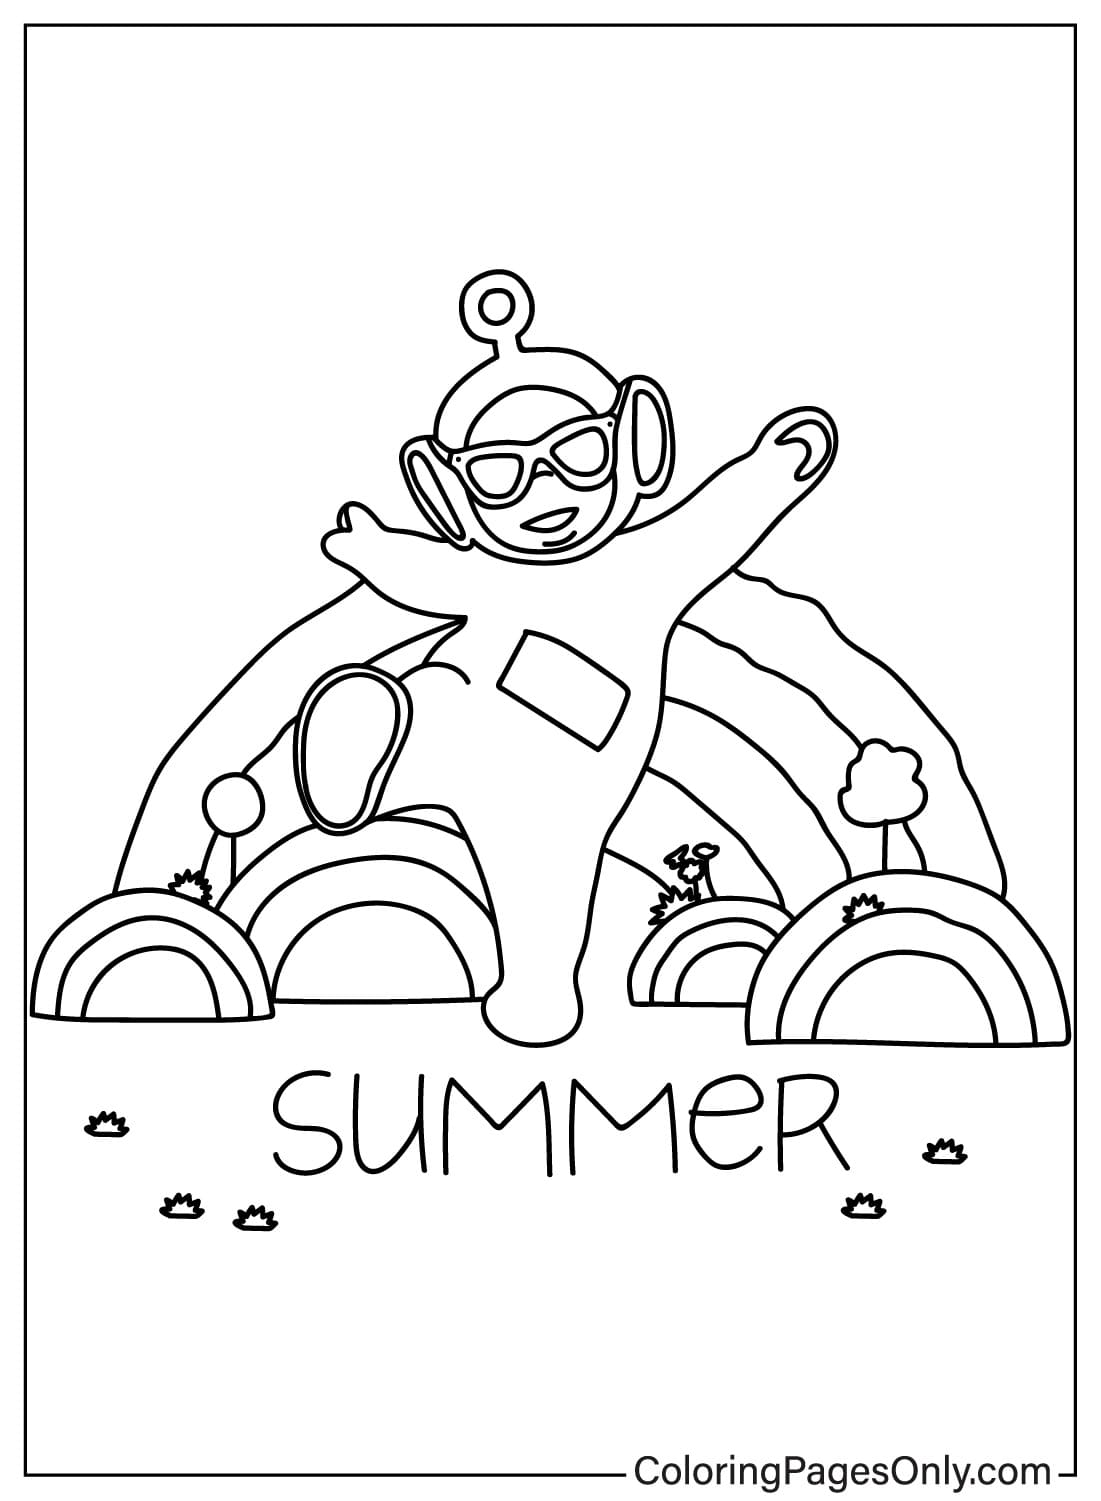 Po Coloring Page Free from Teletubbies - WildBrain